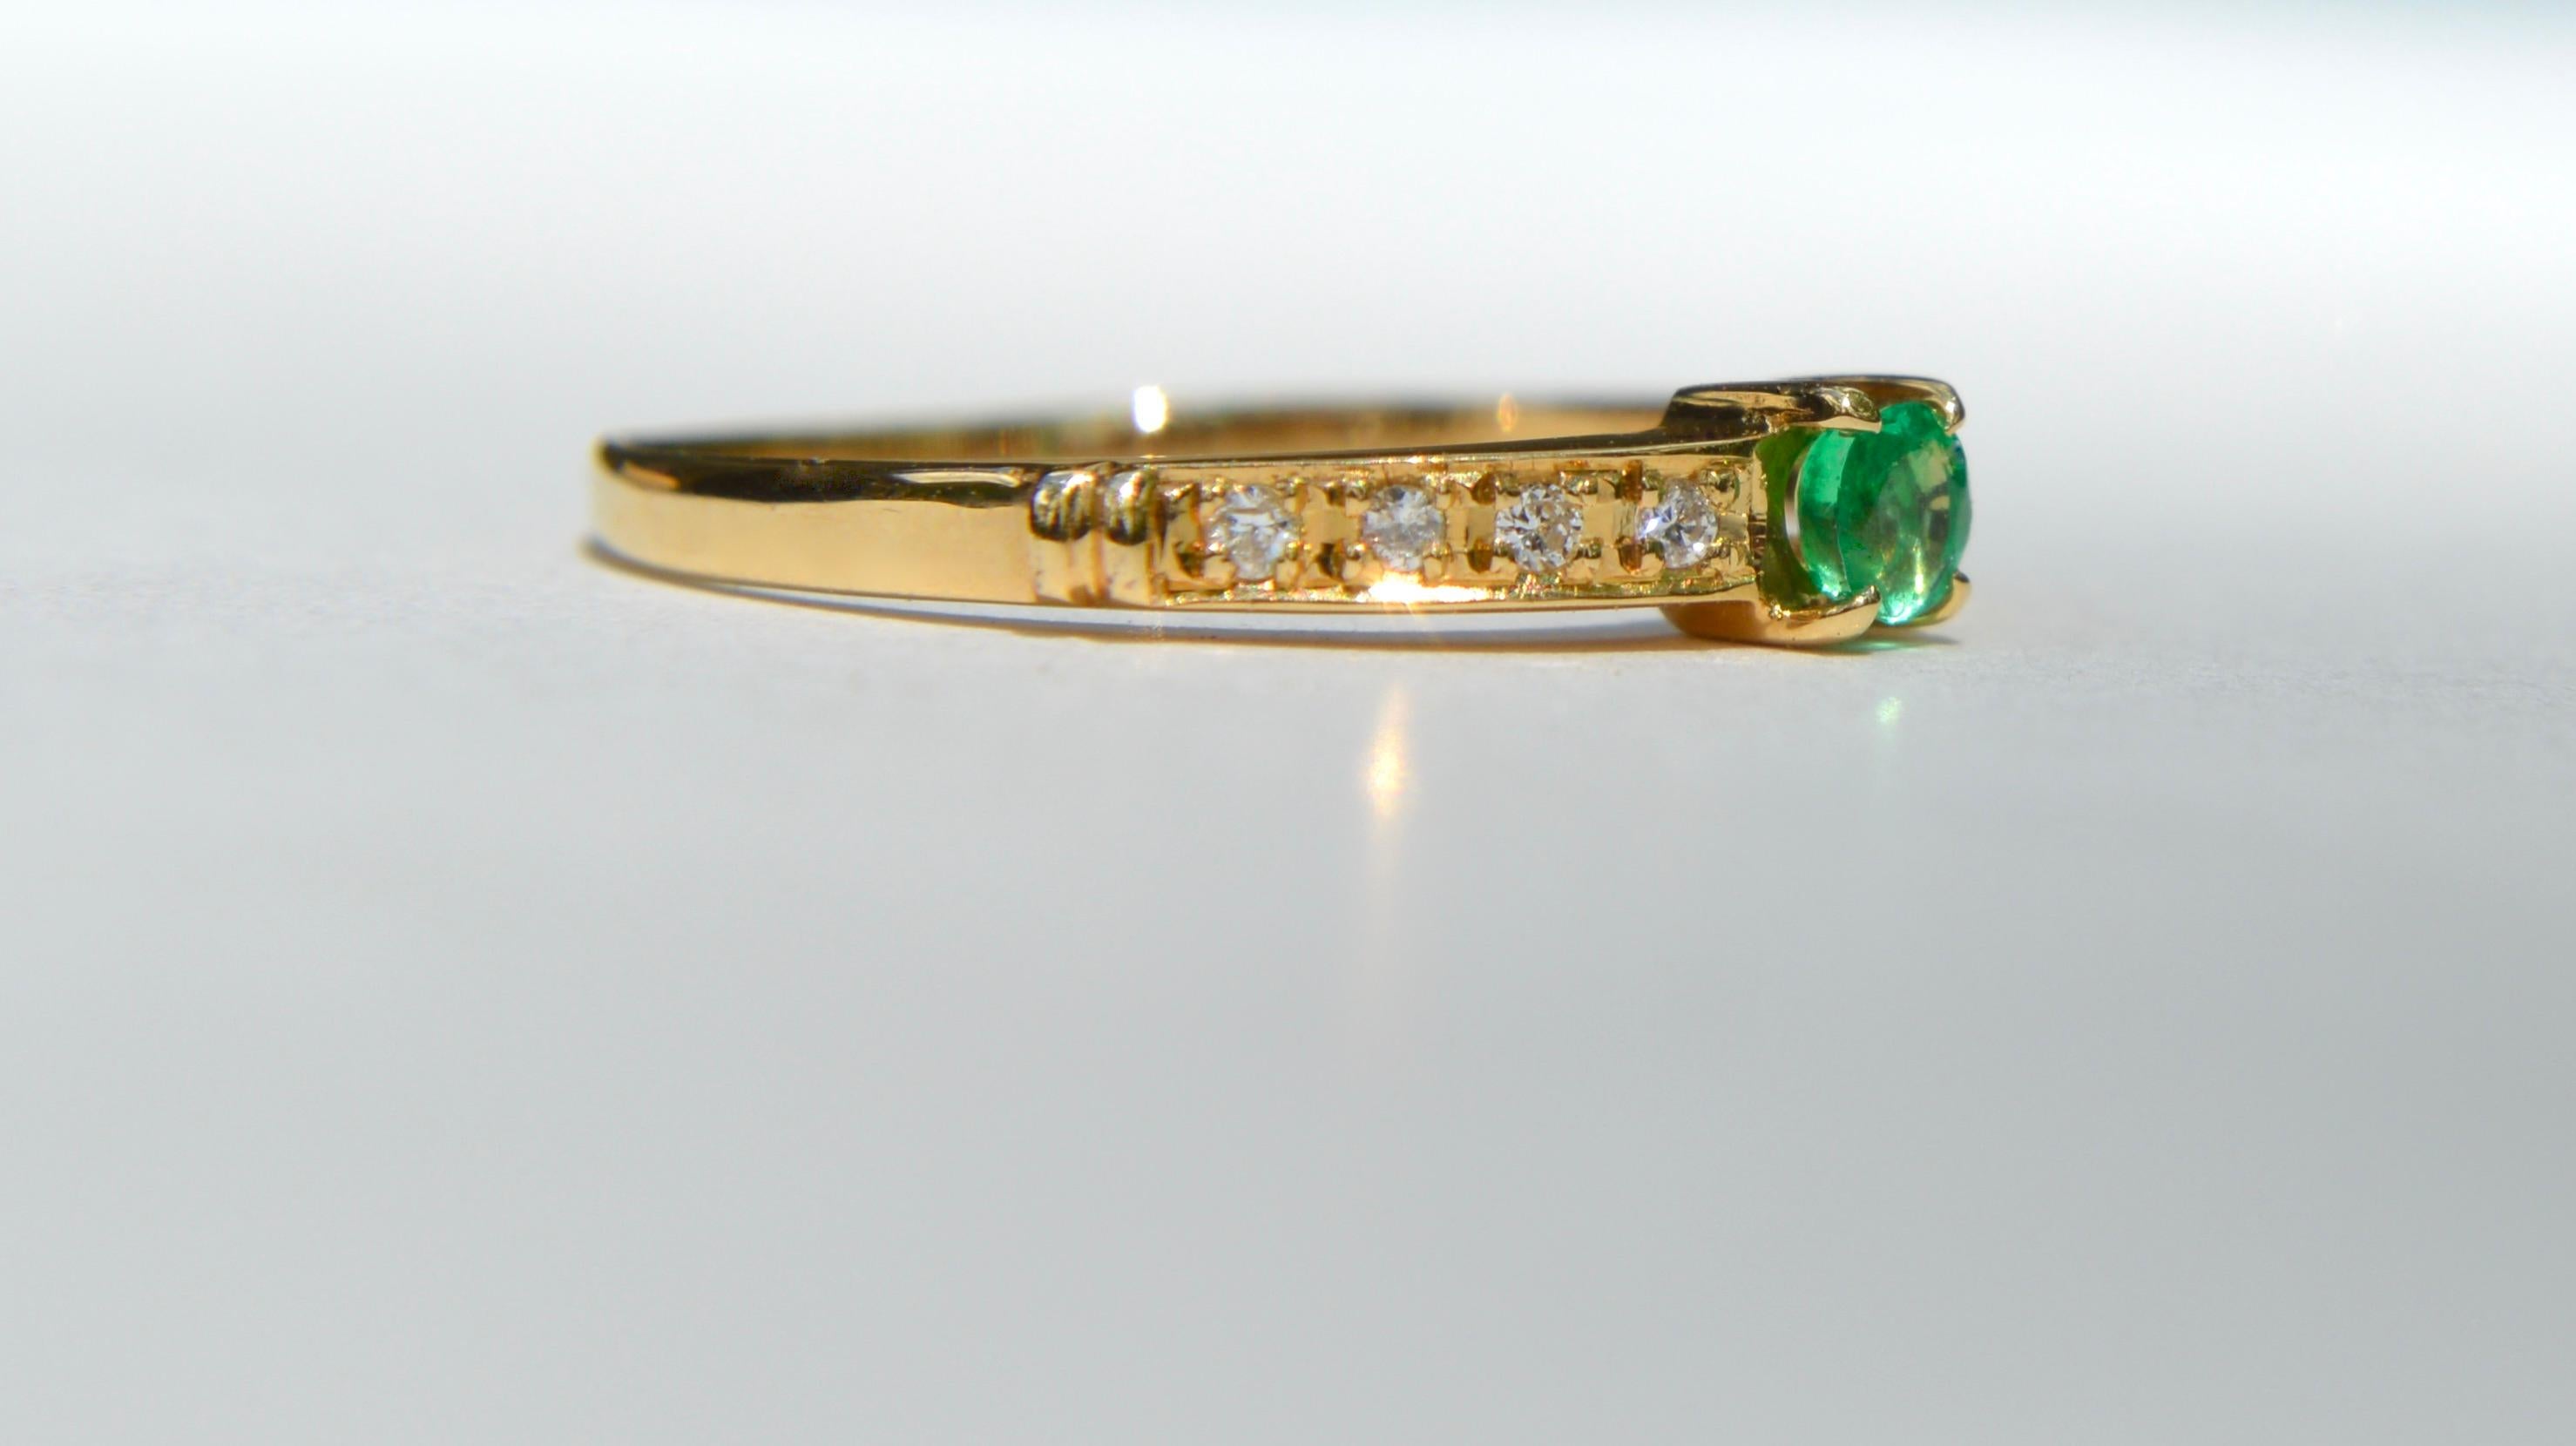 Beautiful vintage midcentury era 1970s .11 carat vintage round cut Colombian emerald 18K yellow gold ring with 8 total .015 carat round cut diamonds (1.5mm diameter each). Emerald measures 3mm, and is a bright saturated Kelly green. The emerald as